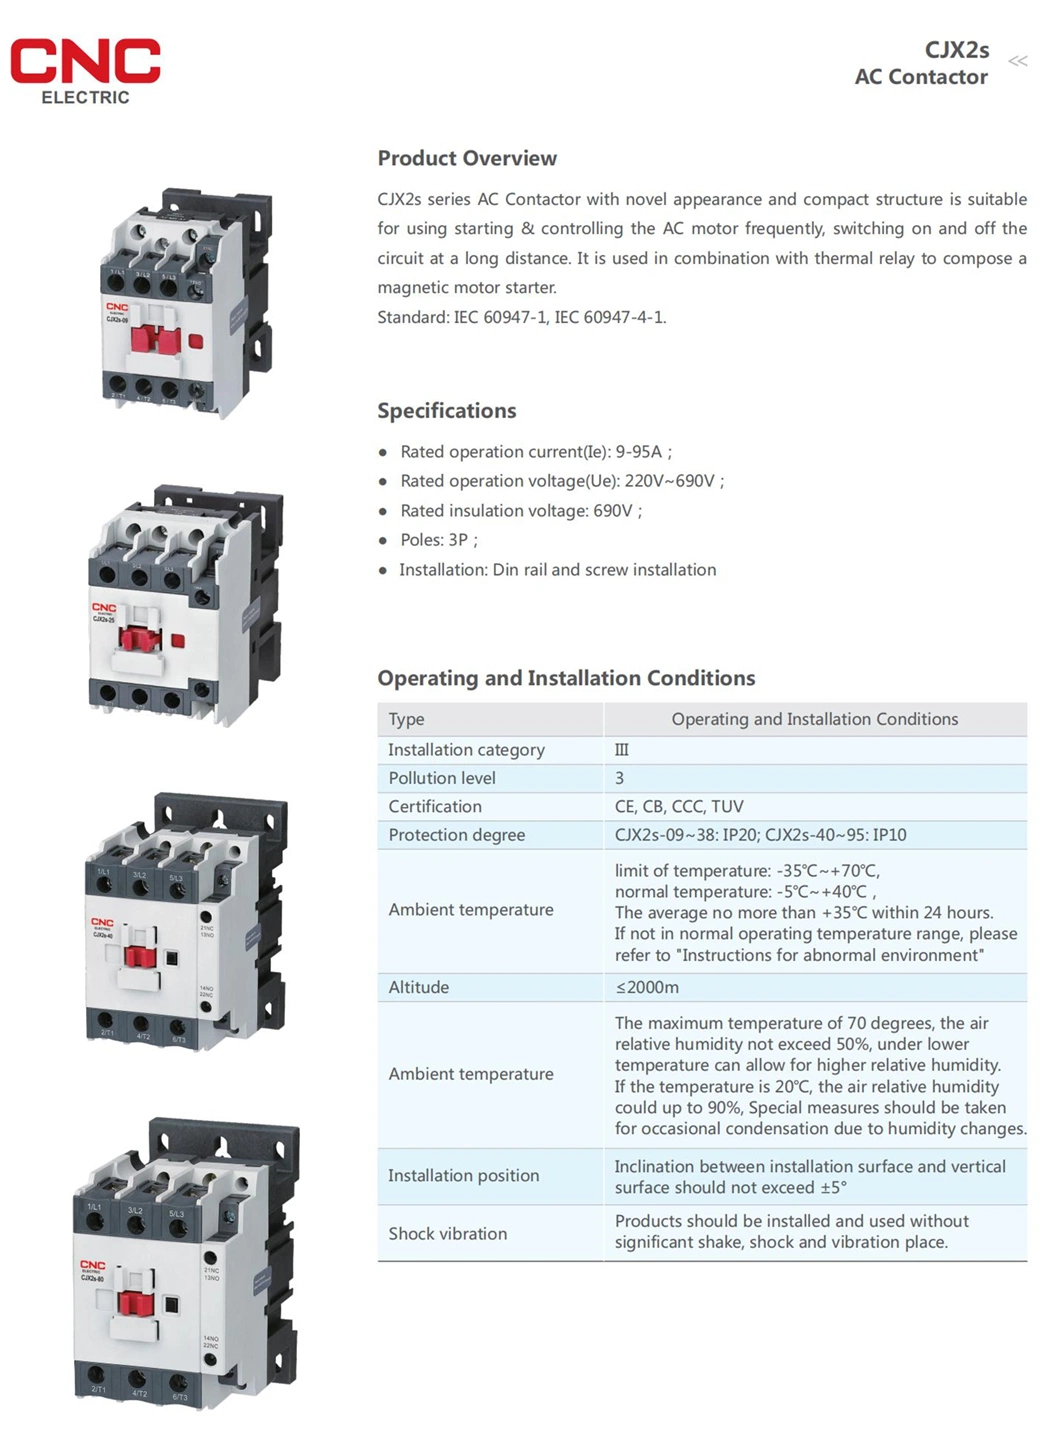 Customized 300-1200 Times/Hour 3 Ls 65A/4 AC Contactor Electrical Supplies